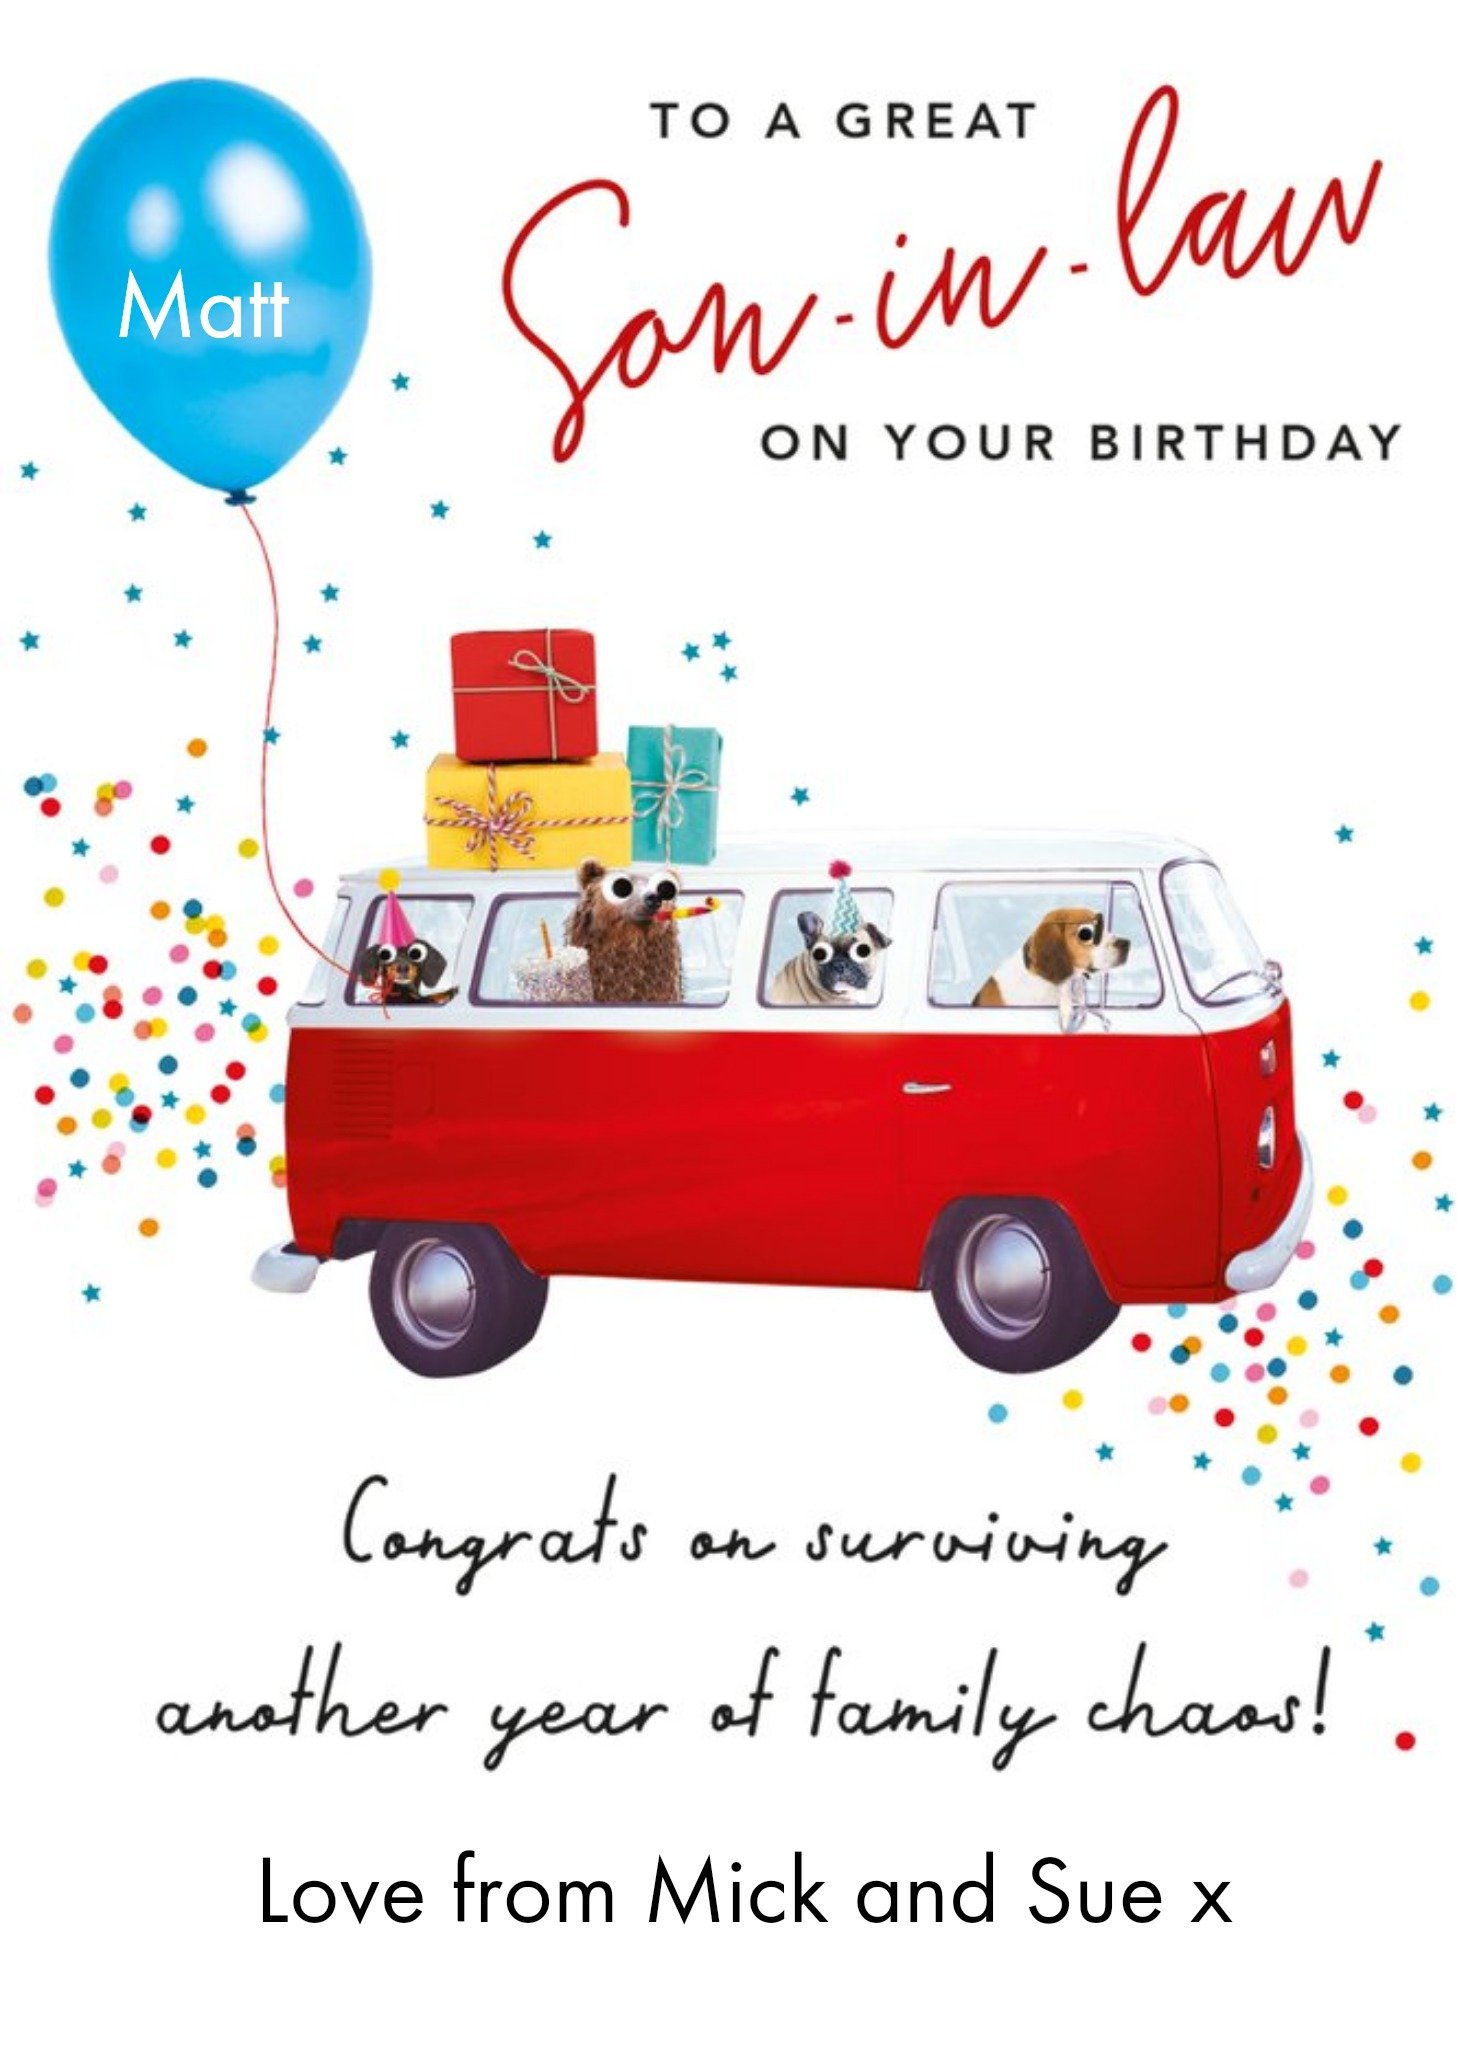 Moonpig Clintons Illustrated Camper Van With Dogs In It To A Great Son In Law On Your Birthday Card,